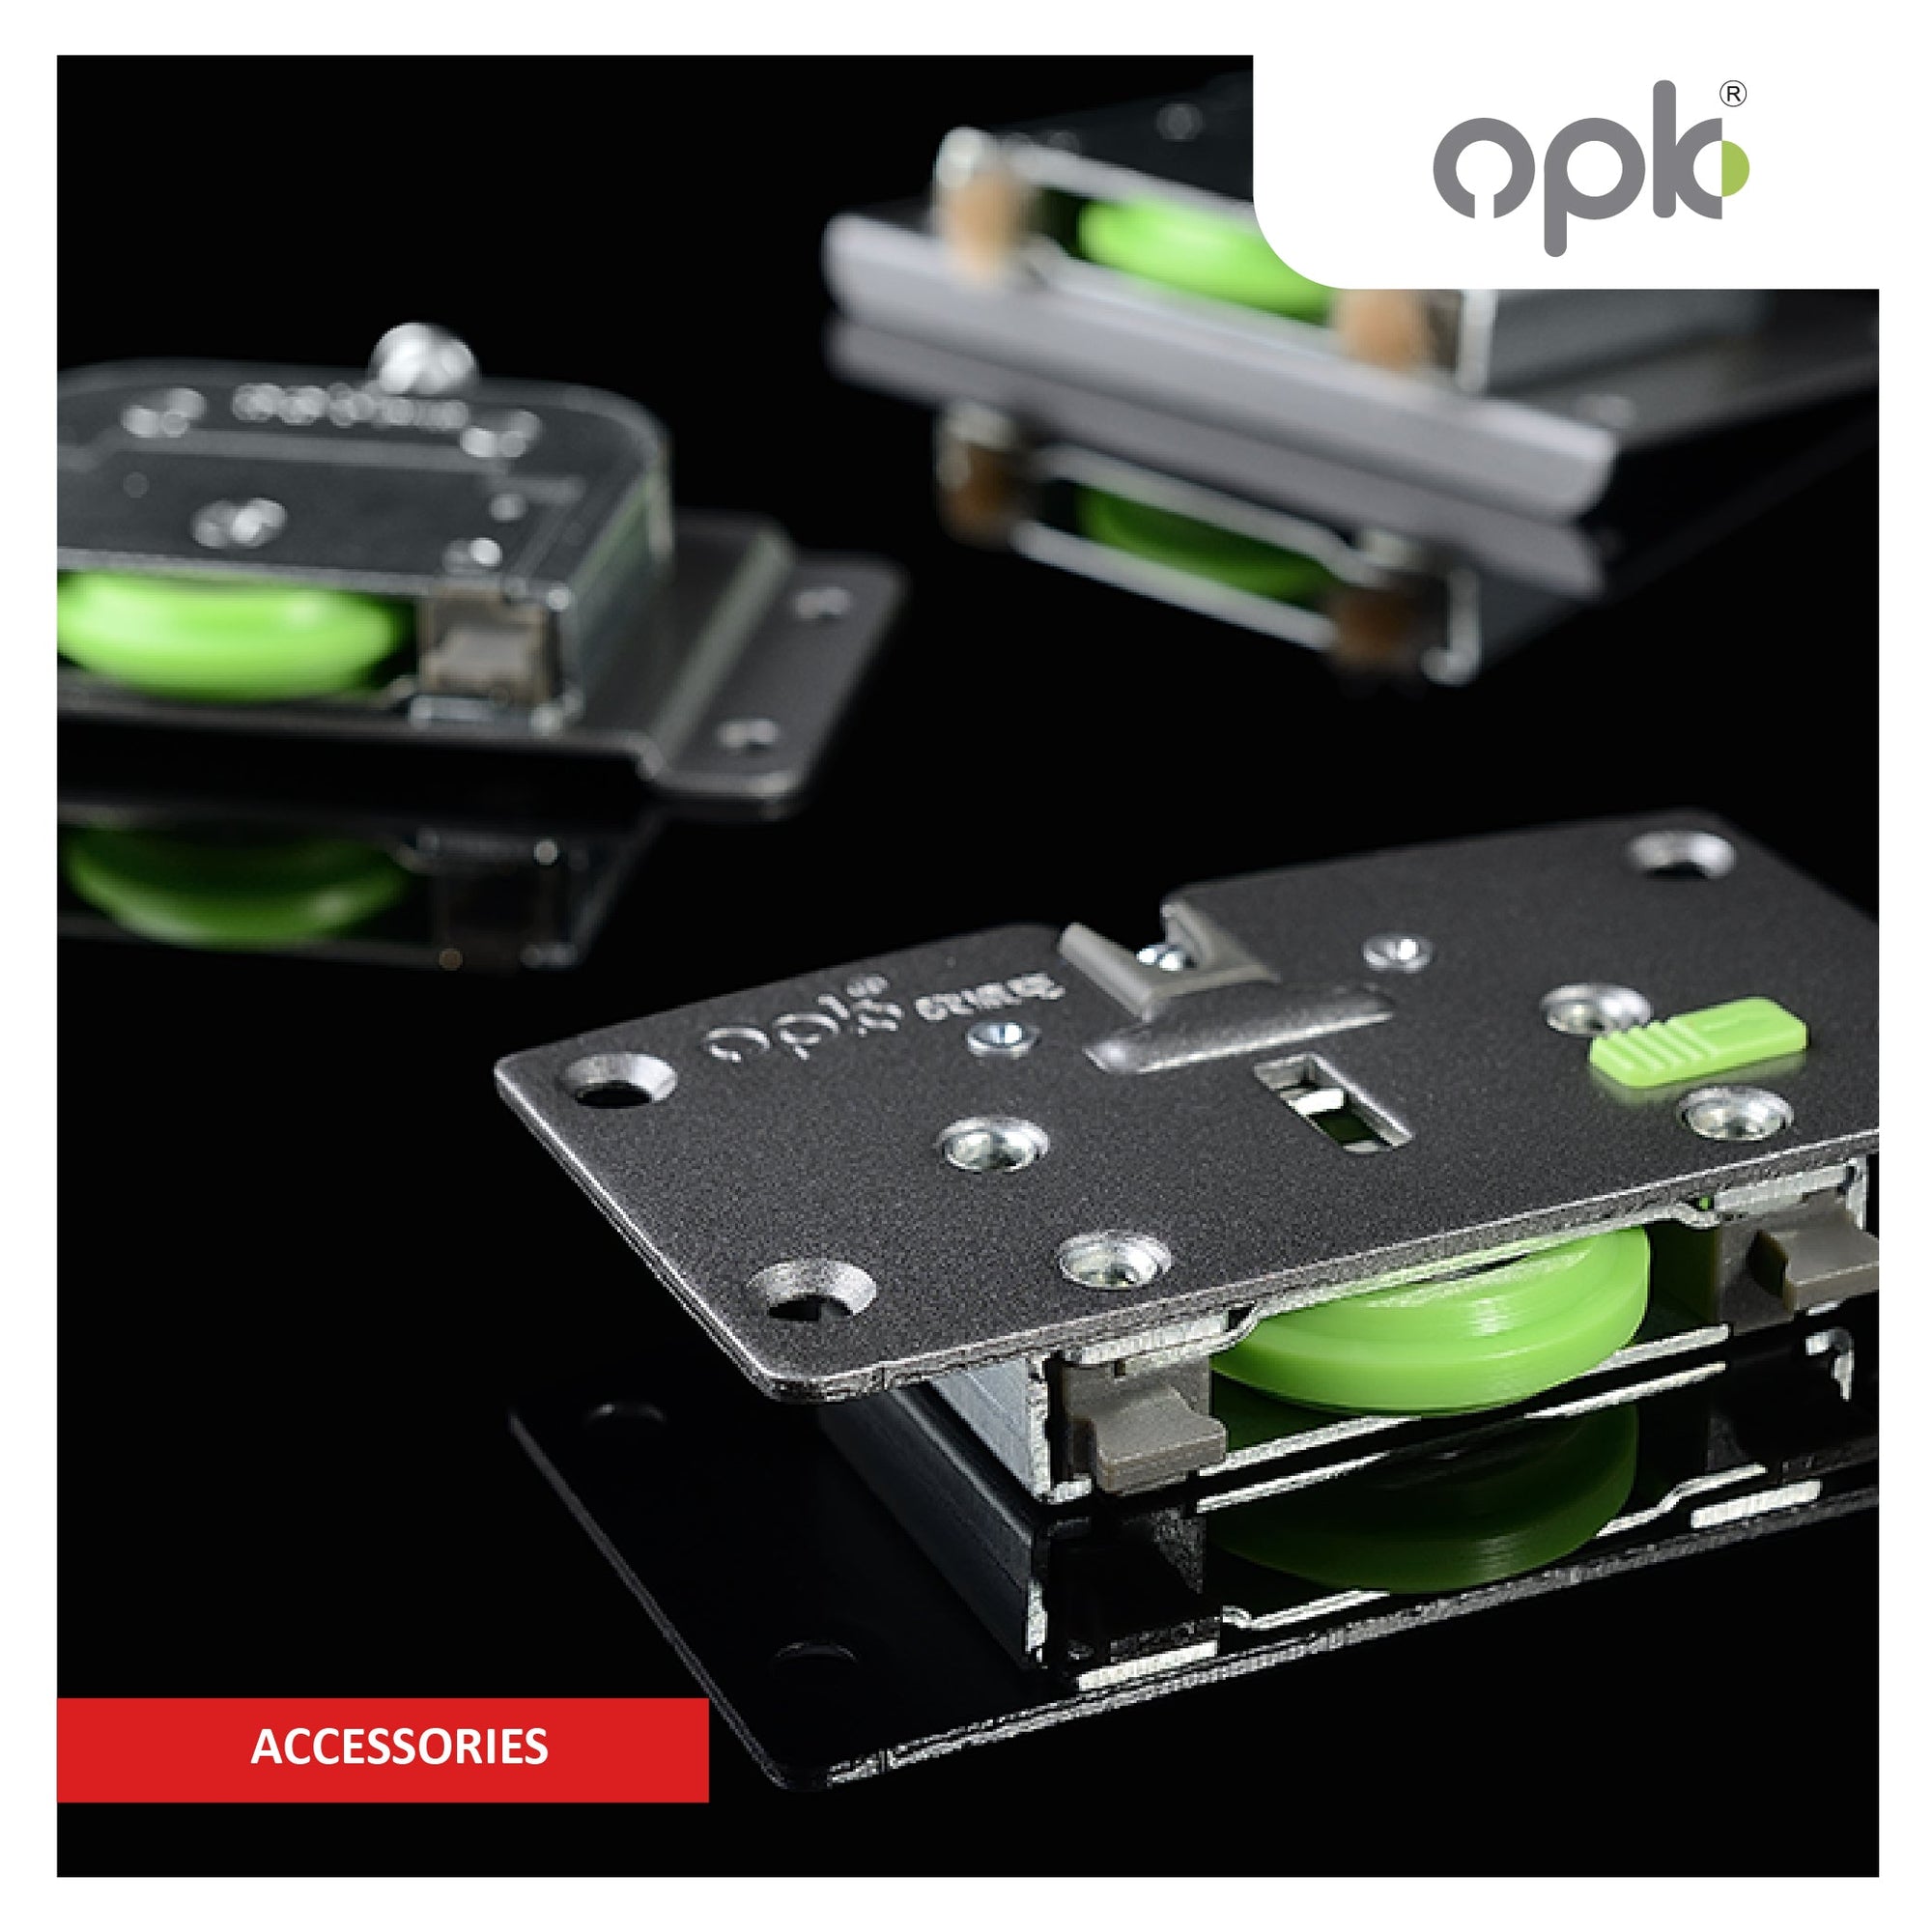 OPK Accessories - Enhance functionality and style with premium quality solutions - M. M. Noorbhoy & Co Collection